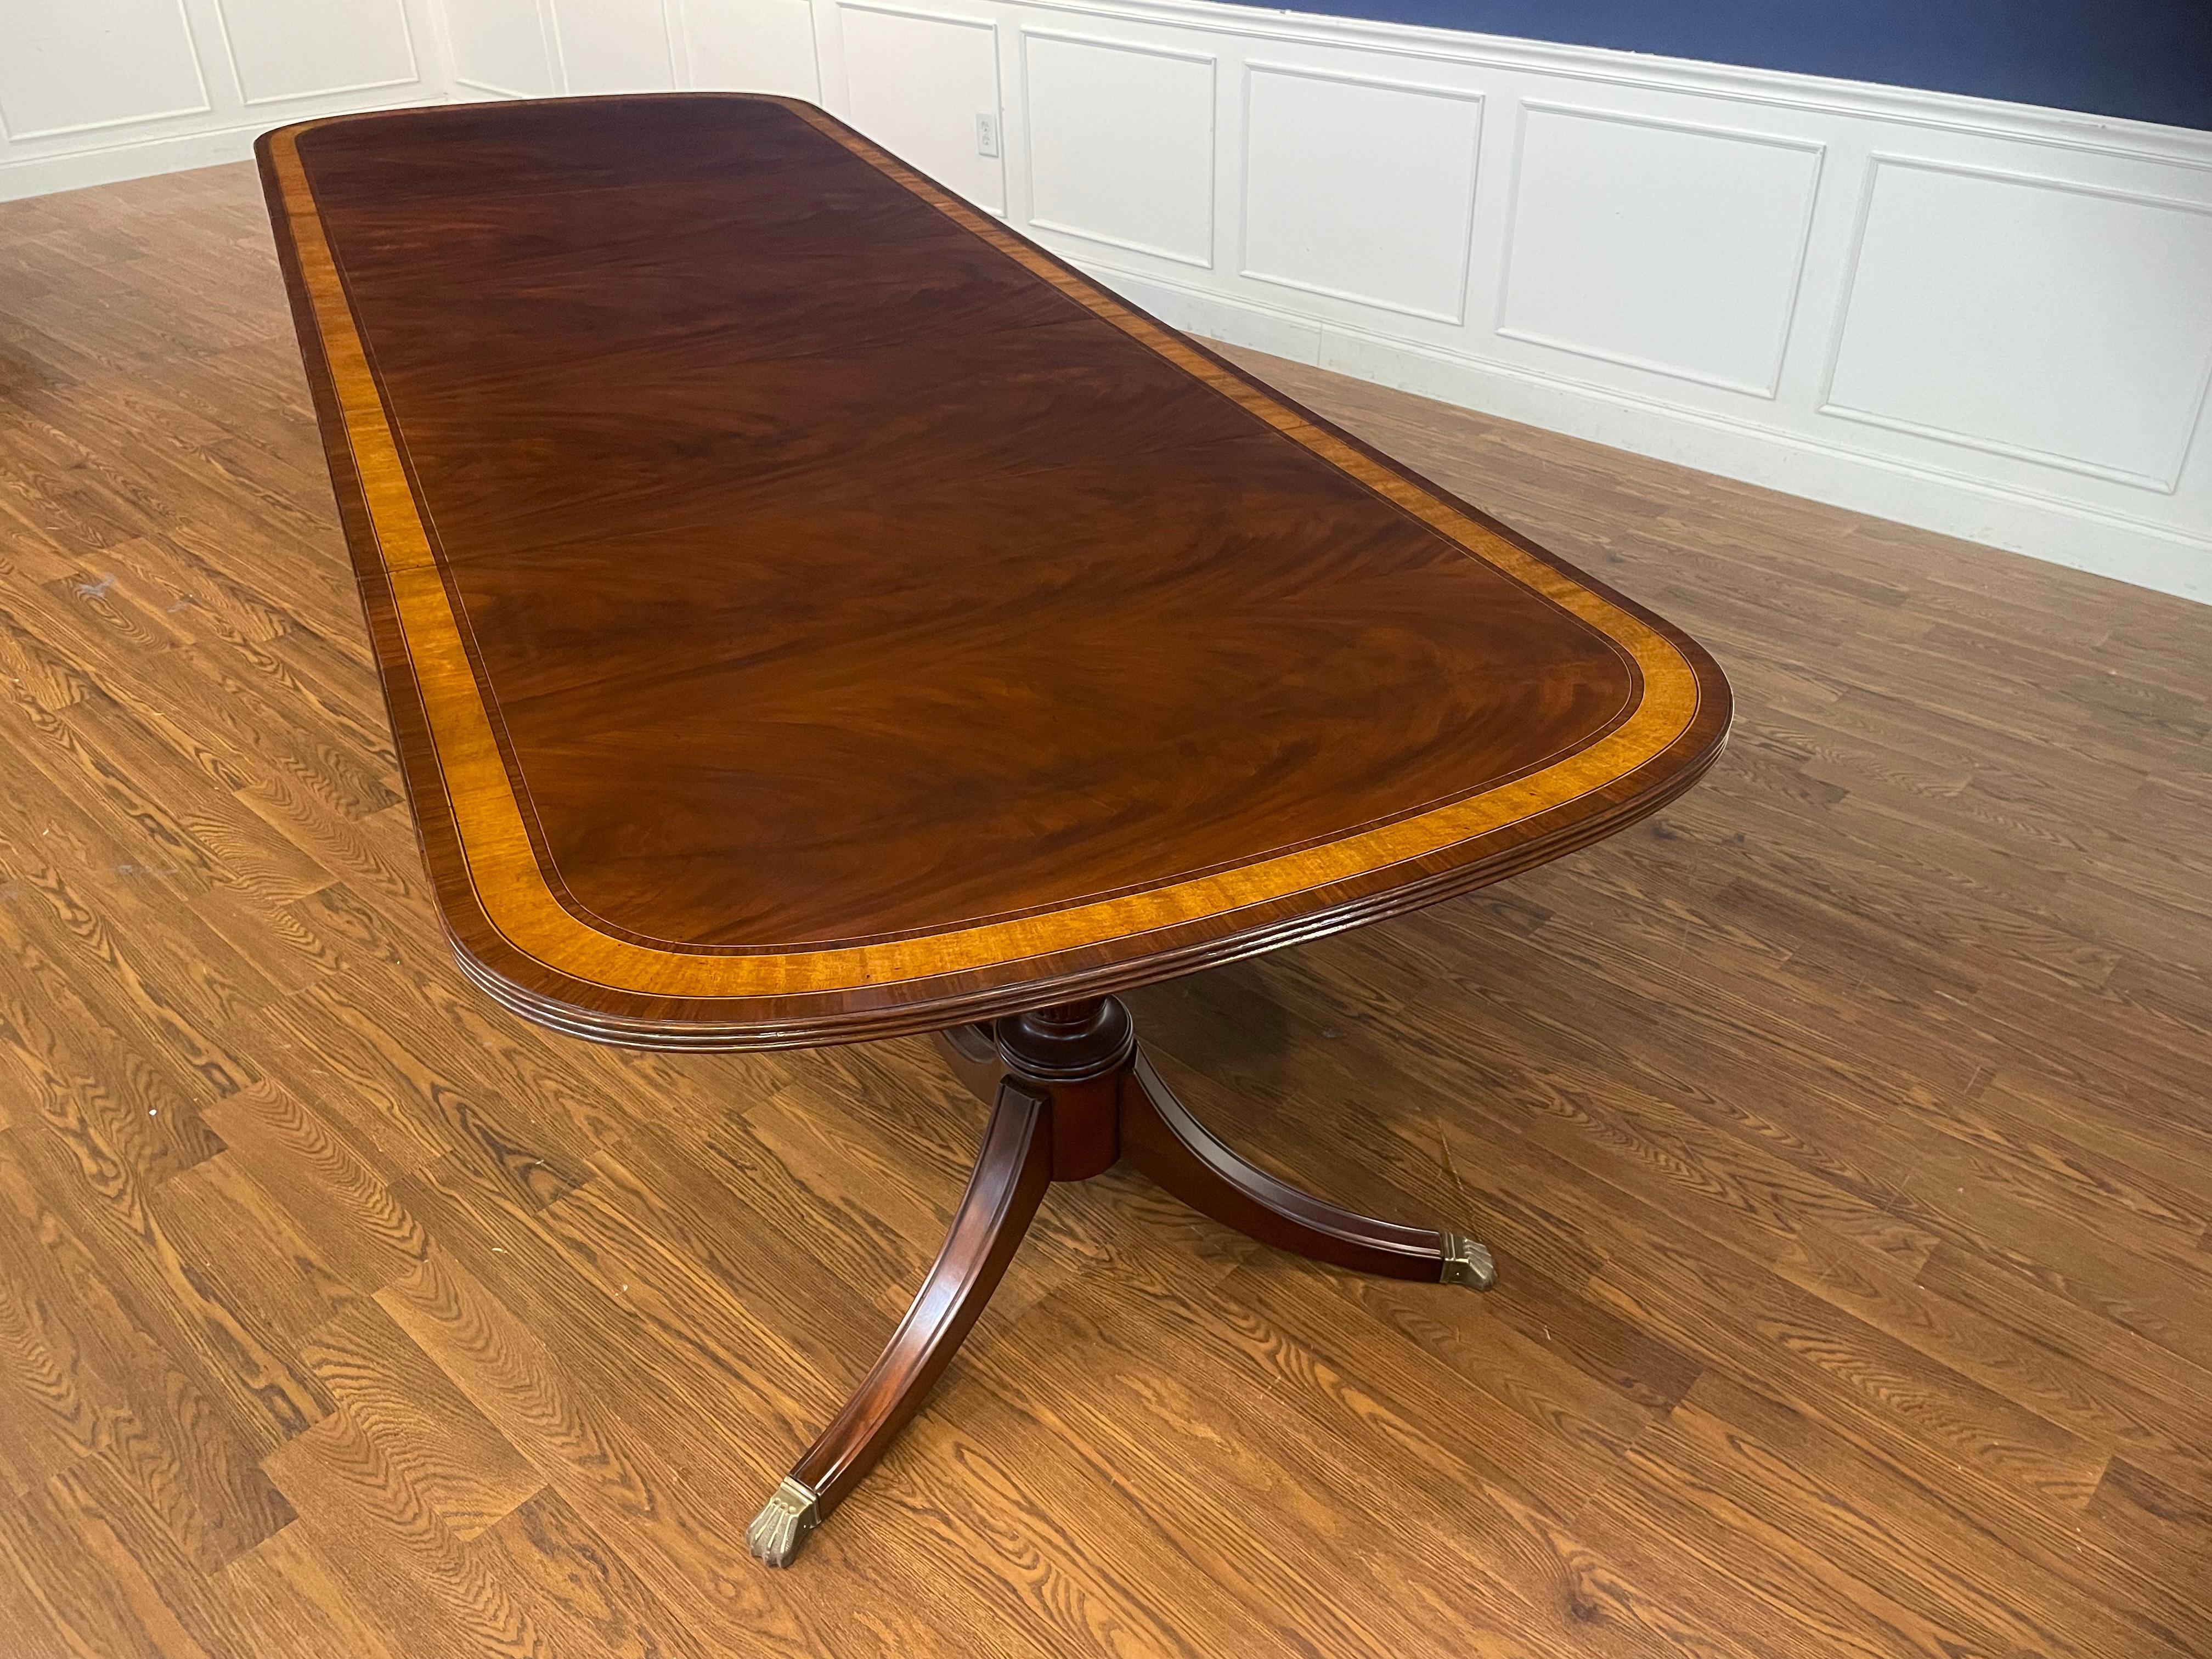 This is our traditional mahogany dining table. It features a field of slip-matched swirly crotch mahogany from West Africa and two borders of Pau Ferro and Satinwood. It has the optional hand steel wool rubbed satin finish. This finish is less